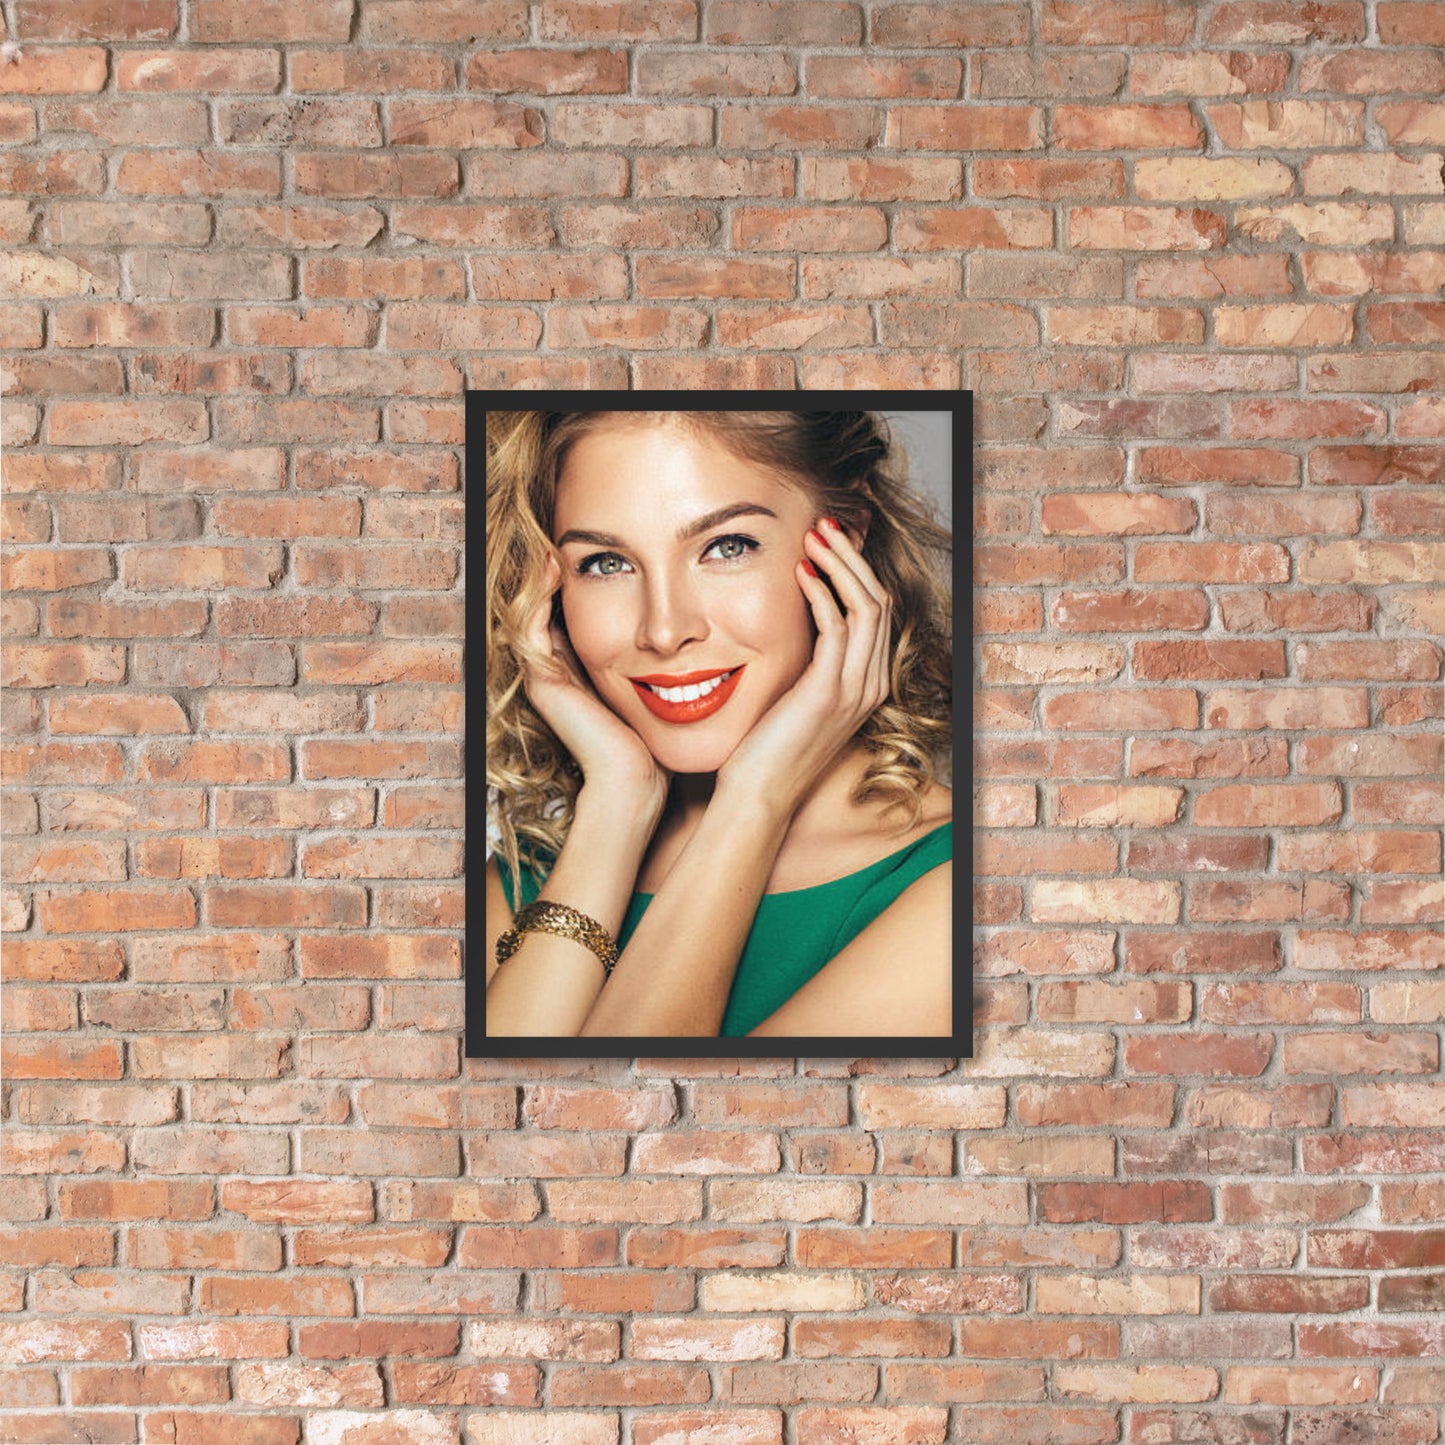 Framed Poster Wall Art Vertical: Priceless Smiles and Laughter (Print Model 0029)